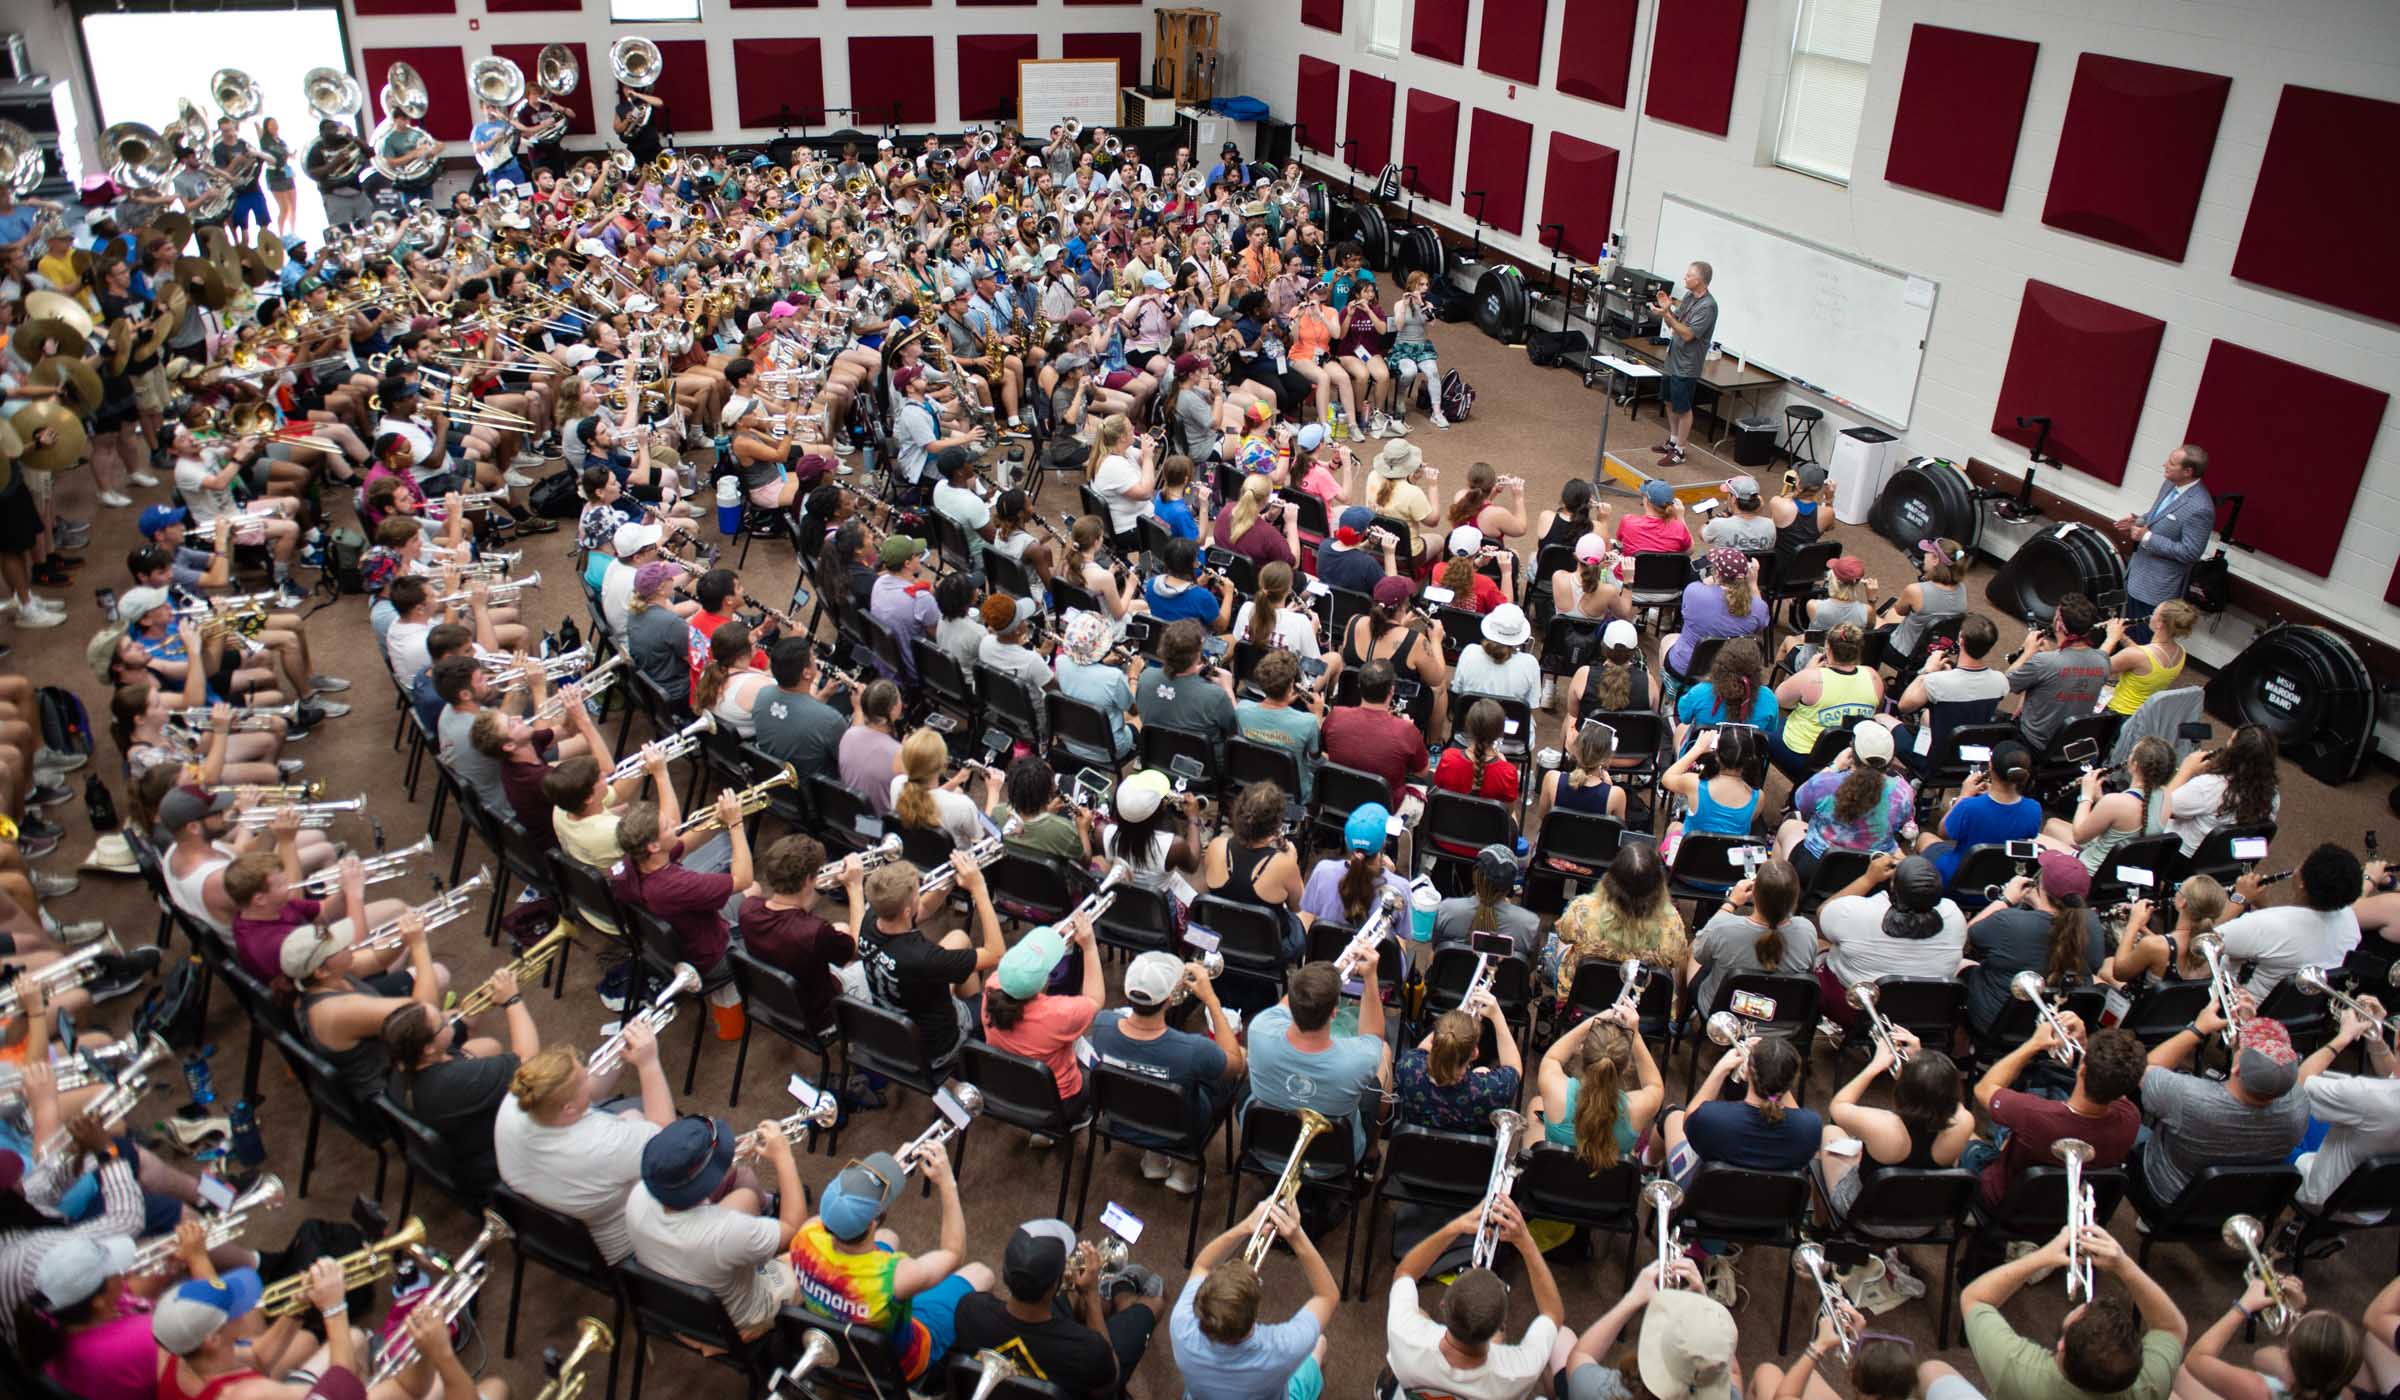 Viewed from above: Band associate director Clifton Taylor conducts a performance of Hail State in the Band Hall, With band members arranged into a semi-circle of seats around him. President Keenum looks on at the far right.